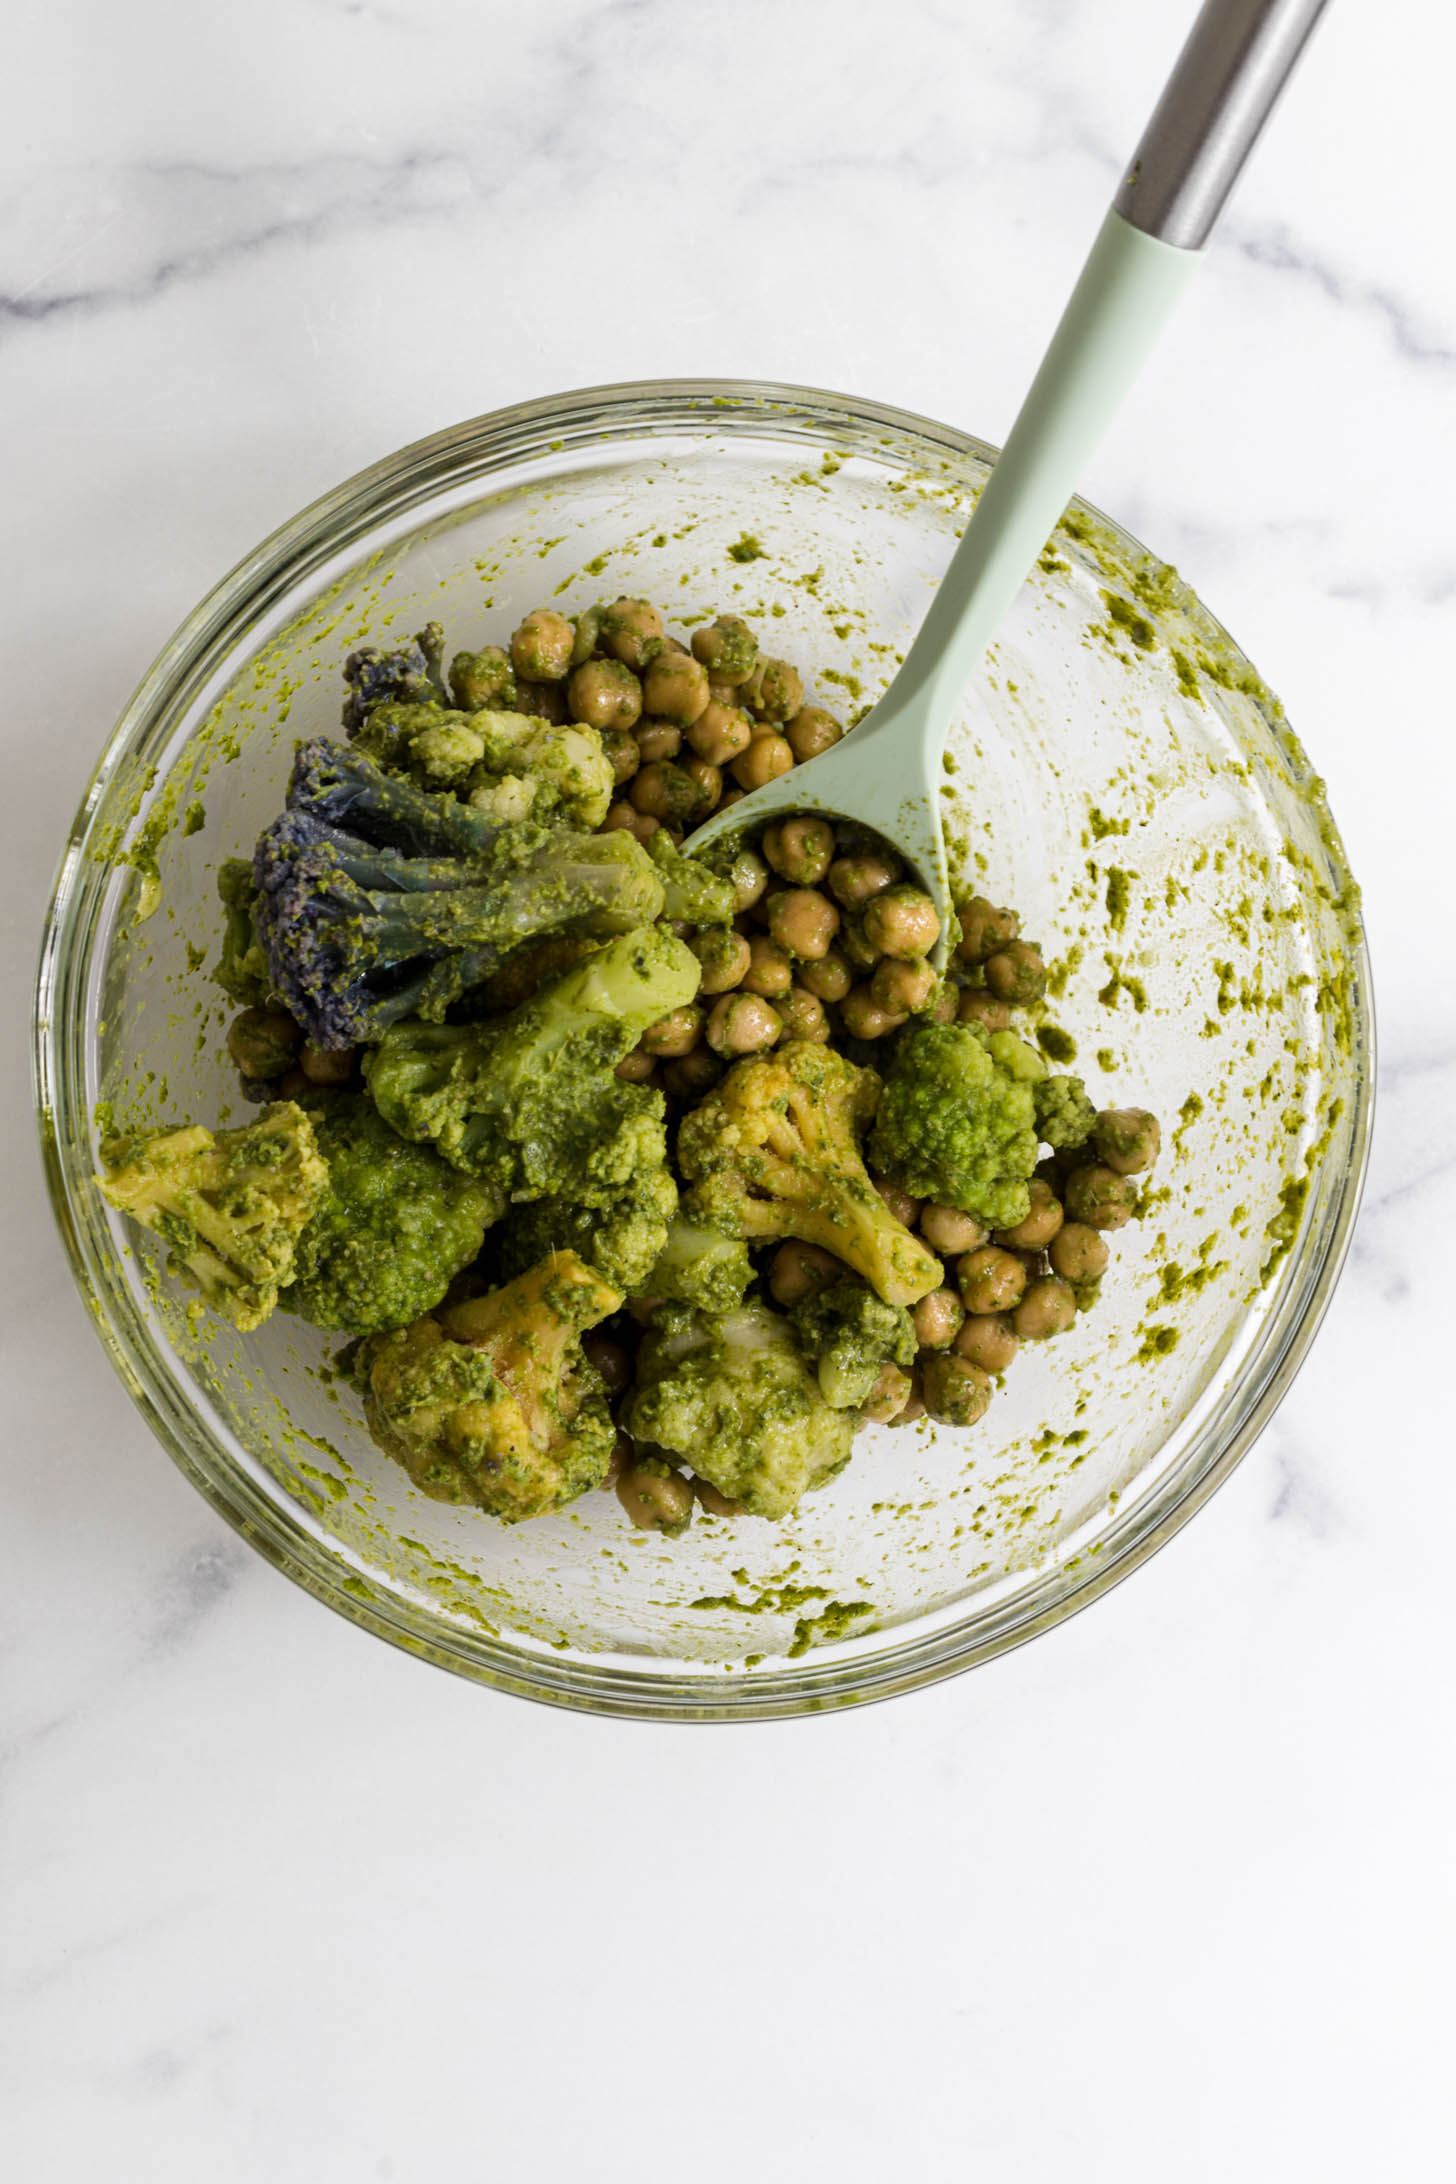 Chickpeas, cauliflower, and pesto mixed in a bowl.